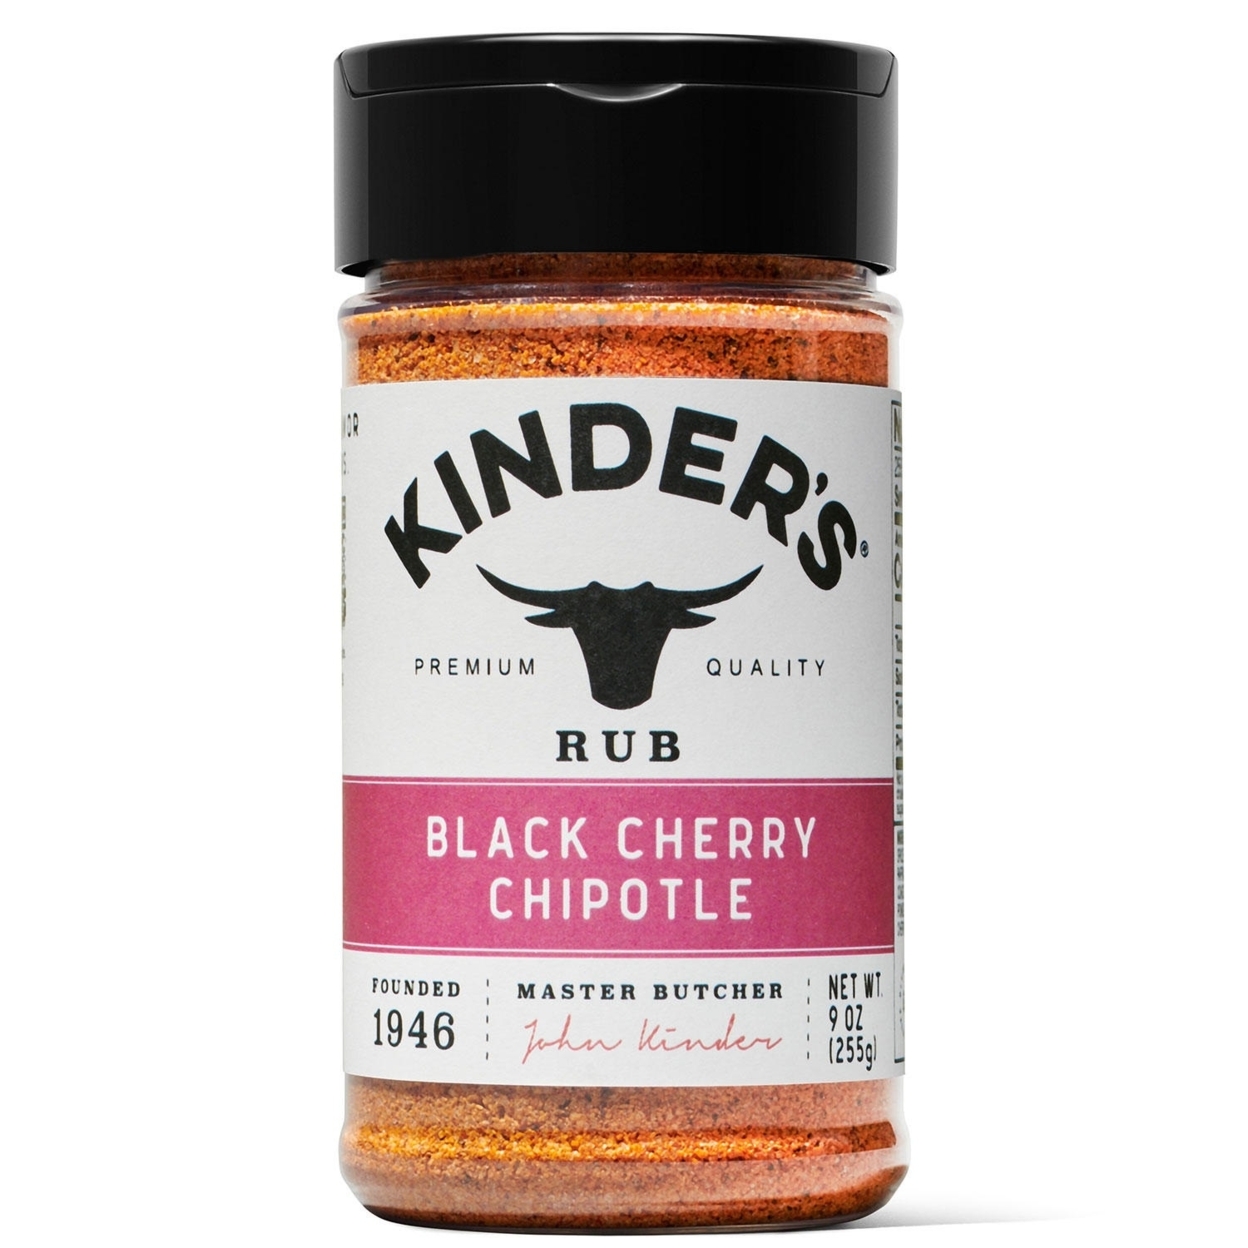 Kinder's Black Cherry Chipotle Rub And Seasoning (9 Ounce)